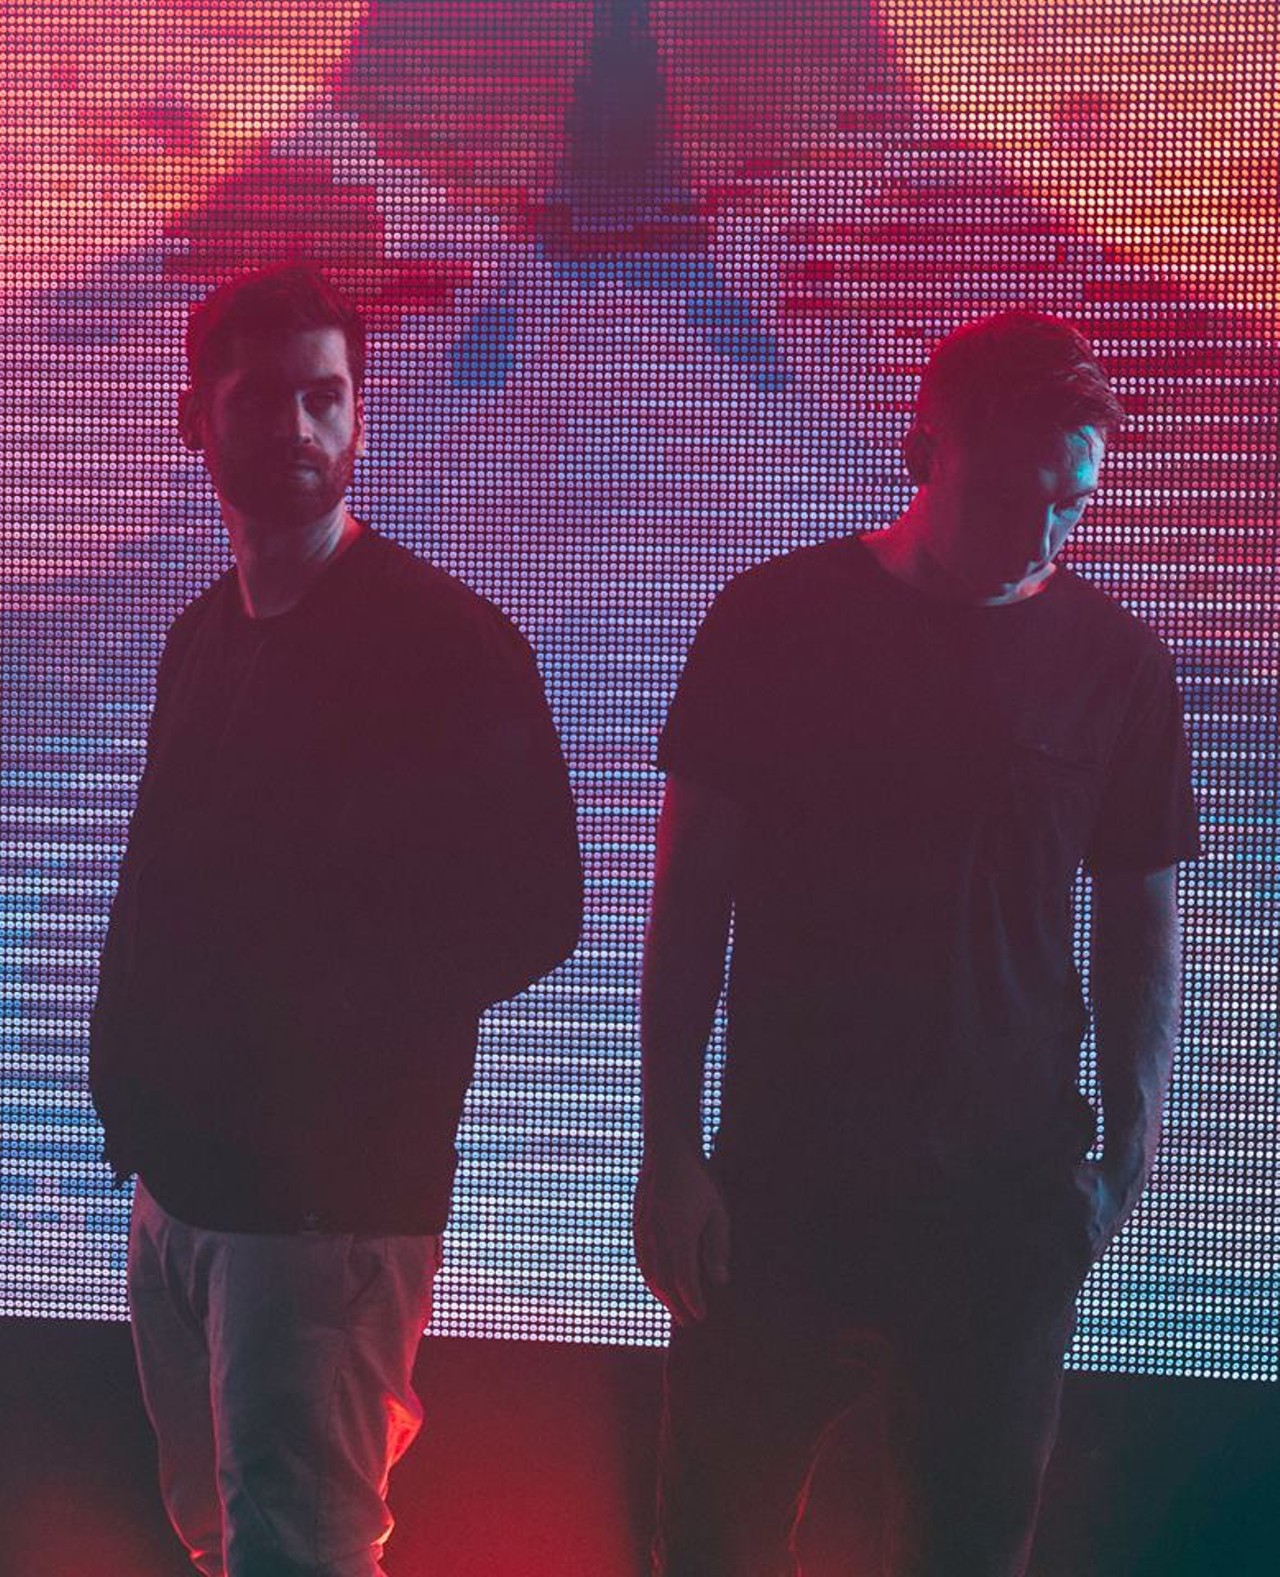 The American electronic music duo, Odesza, will be at the Masonic Temple in Detroit Nov. 14. The duo&#146;s third album A Moment Apart was released Sept. 3. Doors open at 7 p.m. Photo courtesy of Facebook.